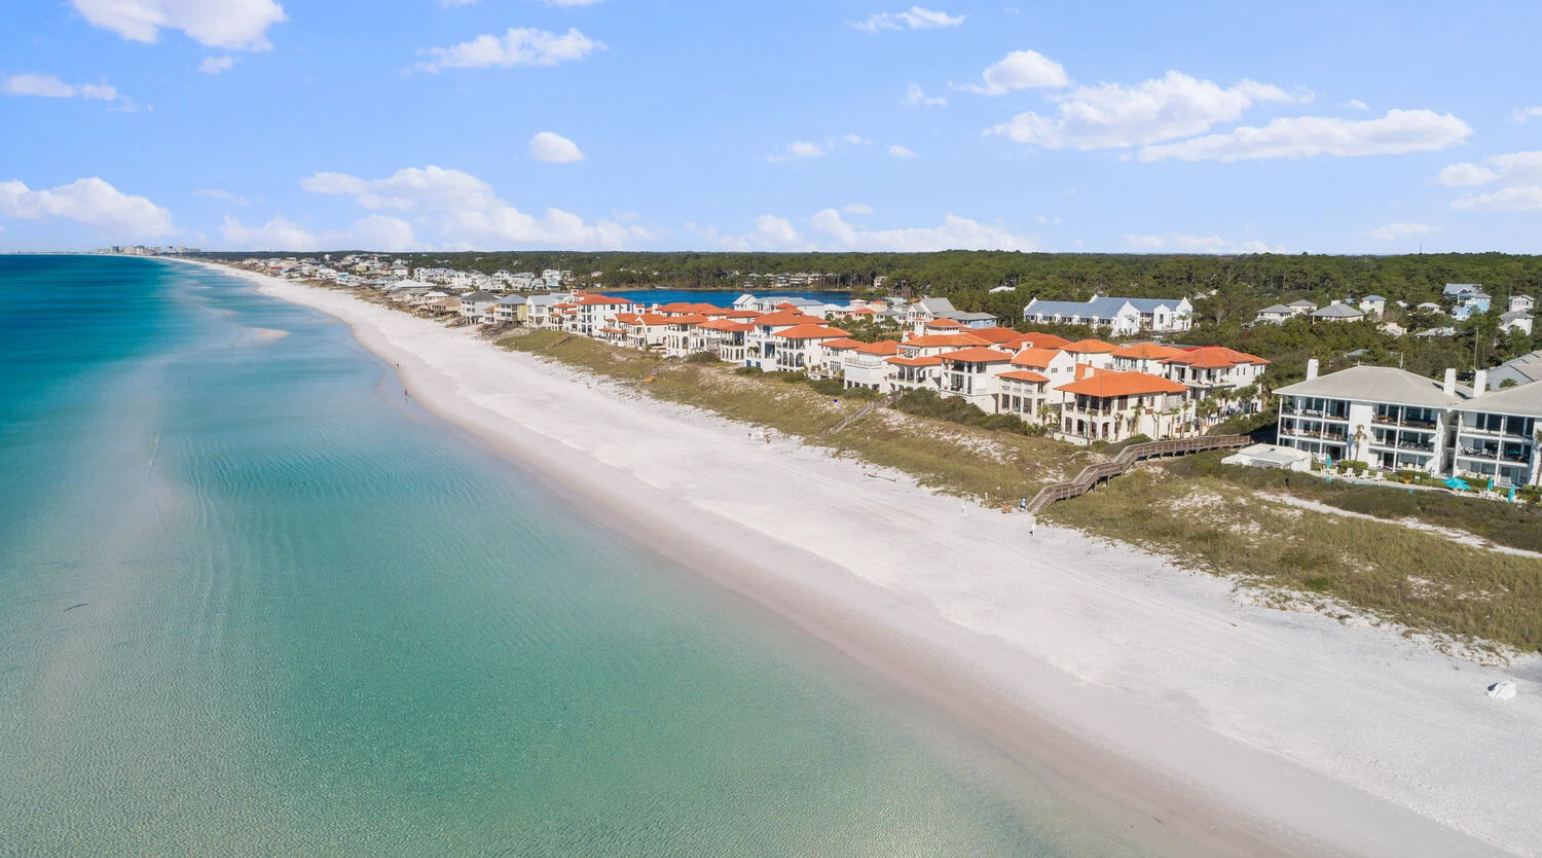 30A Vacation Accommodations for Everyone